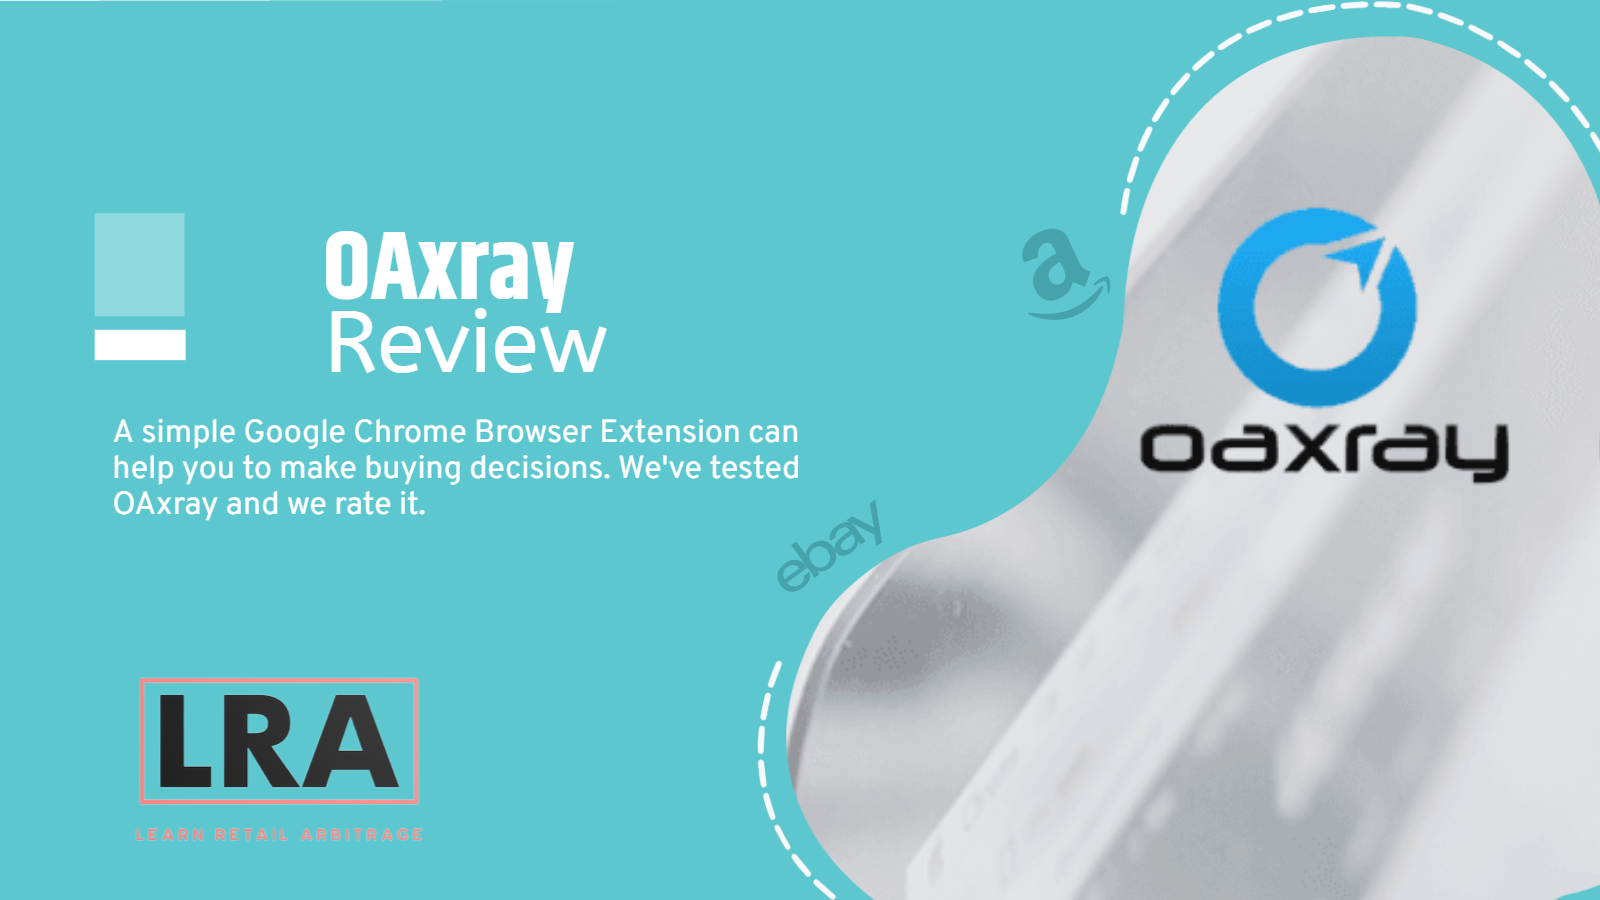 Oaxray Review